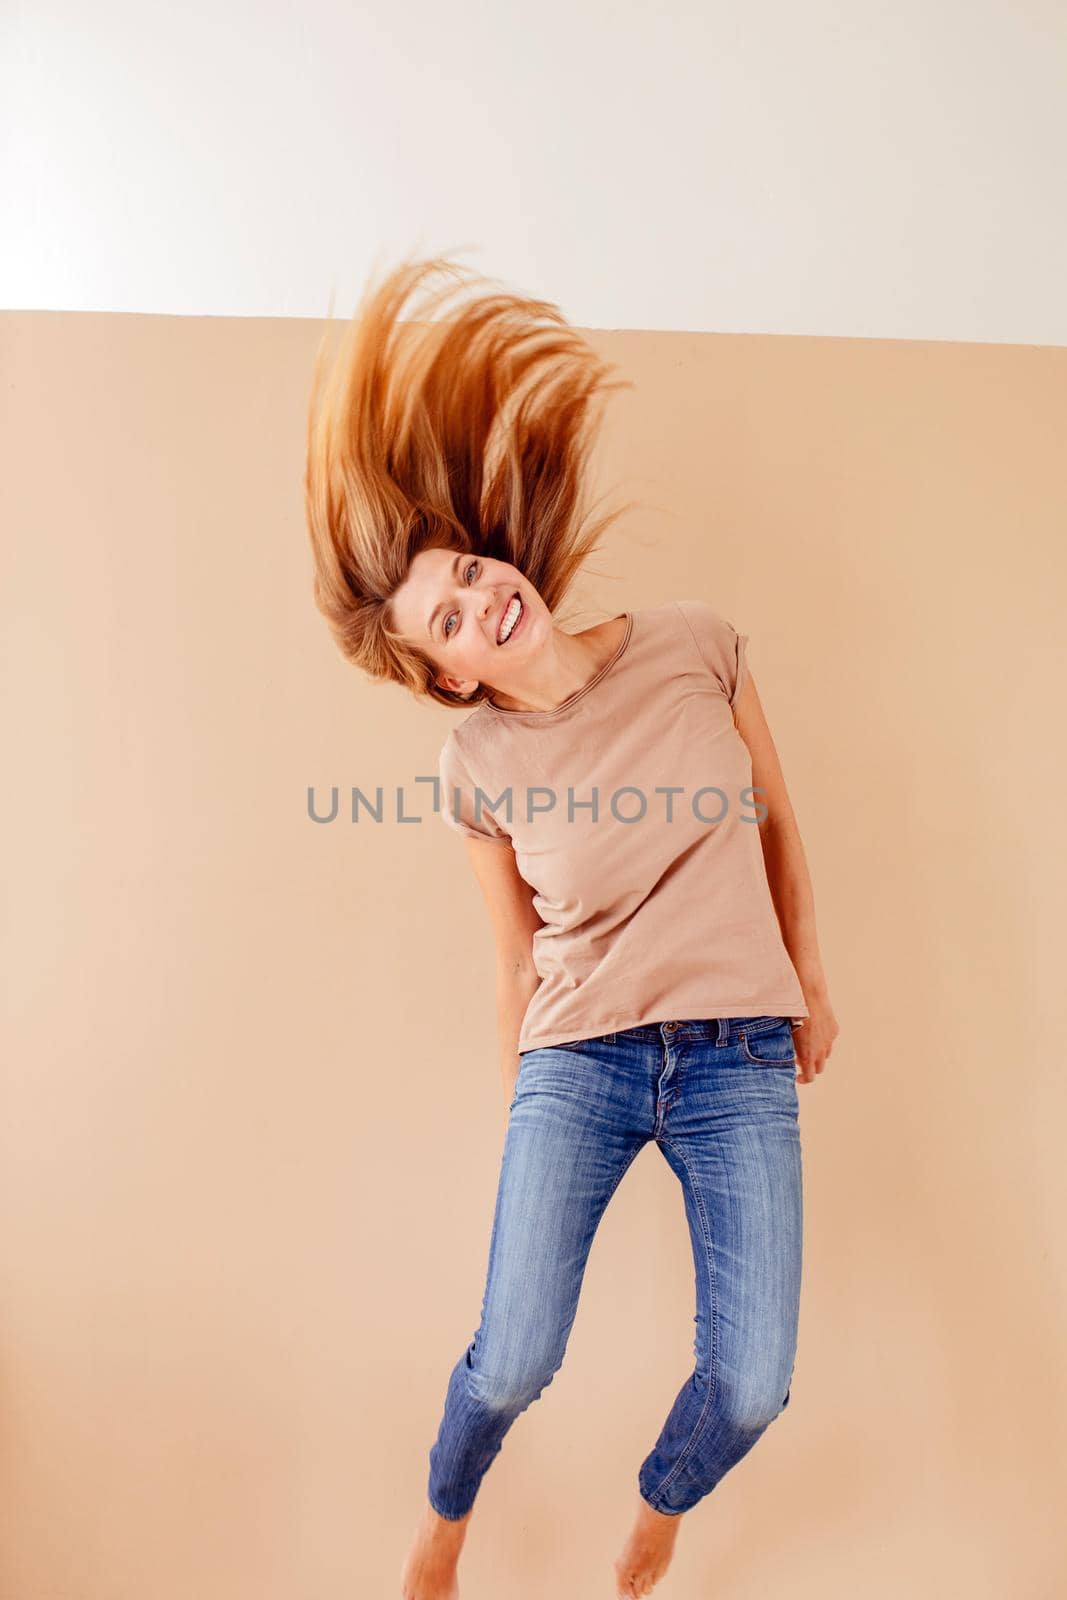 Full length portrait of a joyful young woman jumping and celebrating over cream background